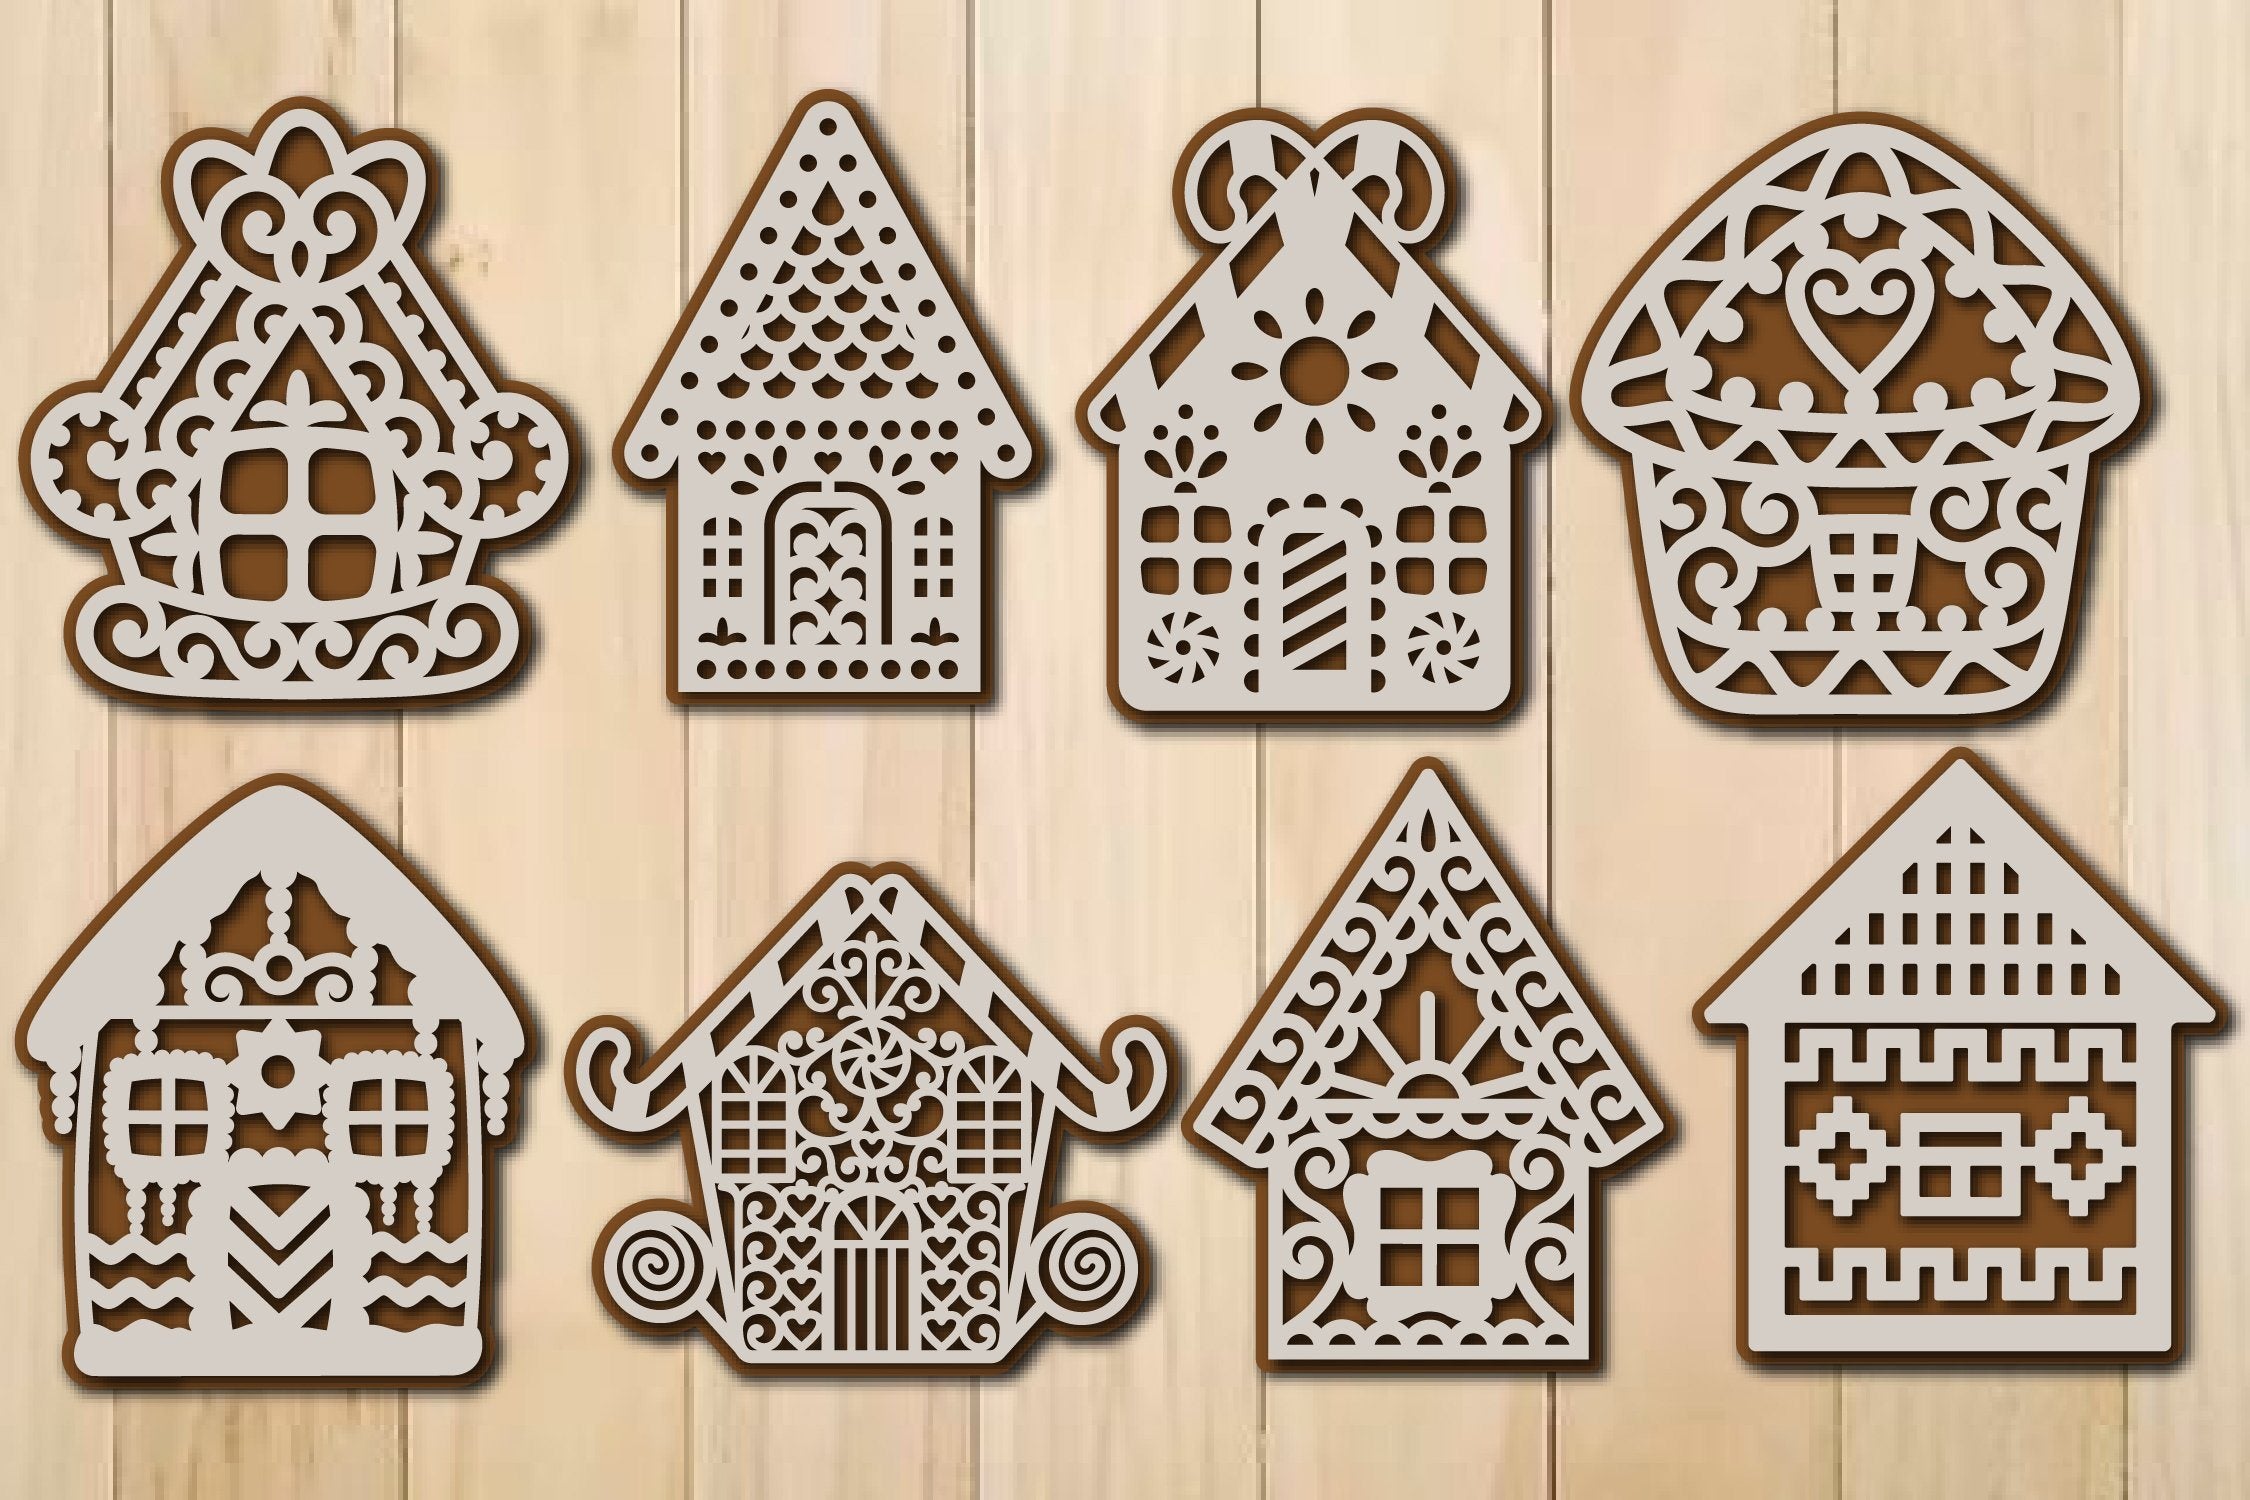 gingerbread house silhouettes